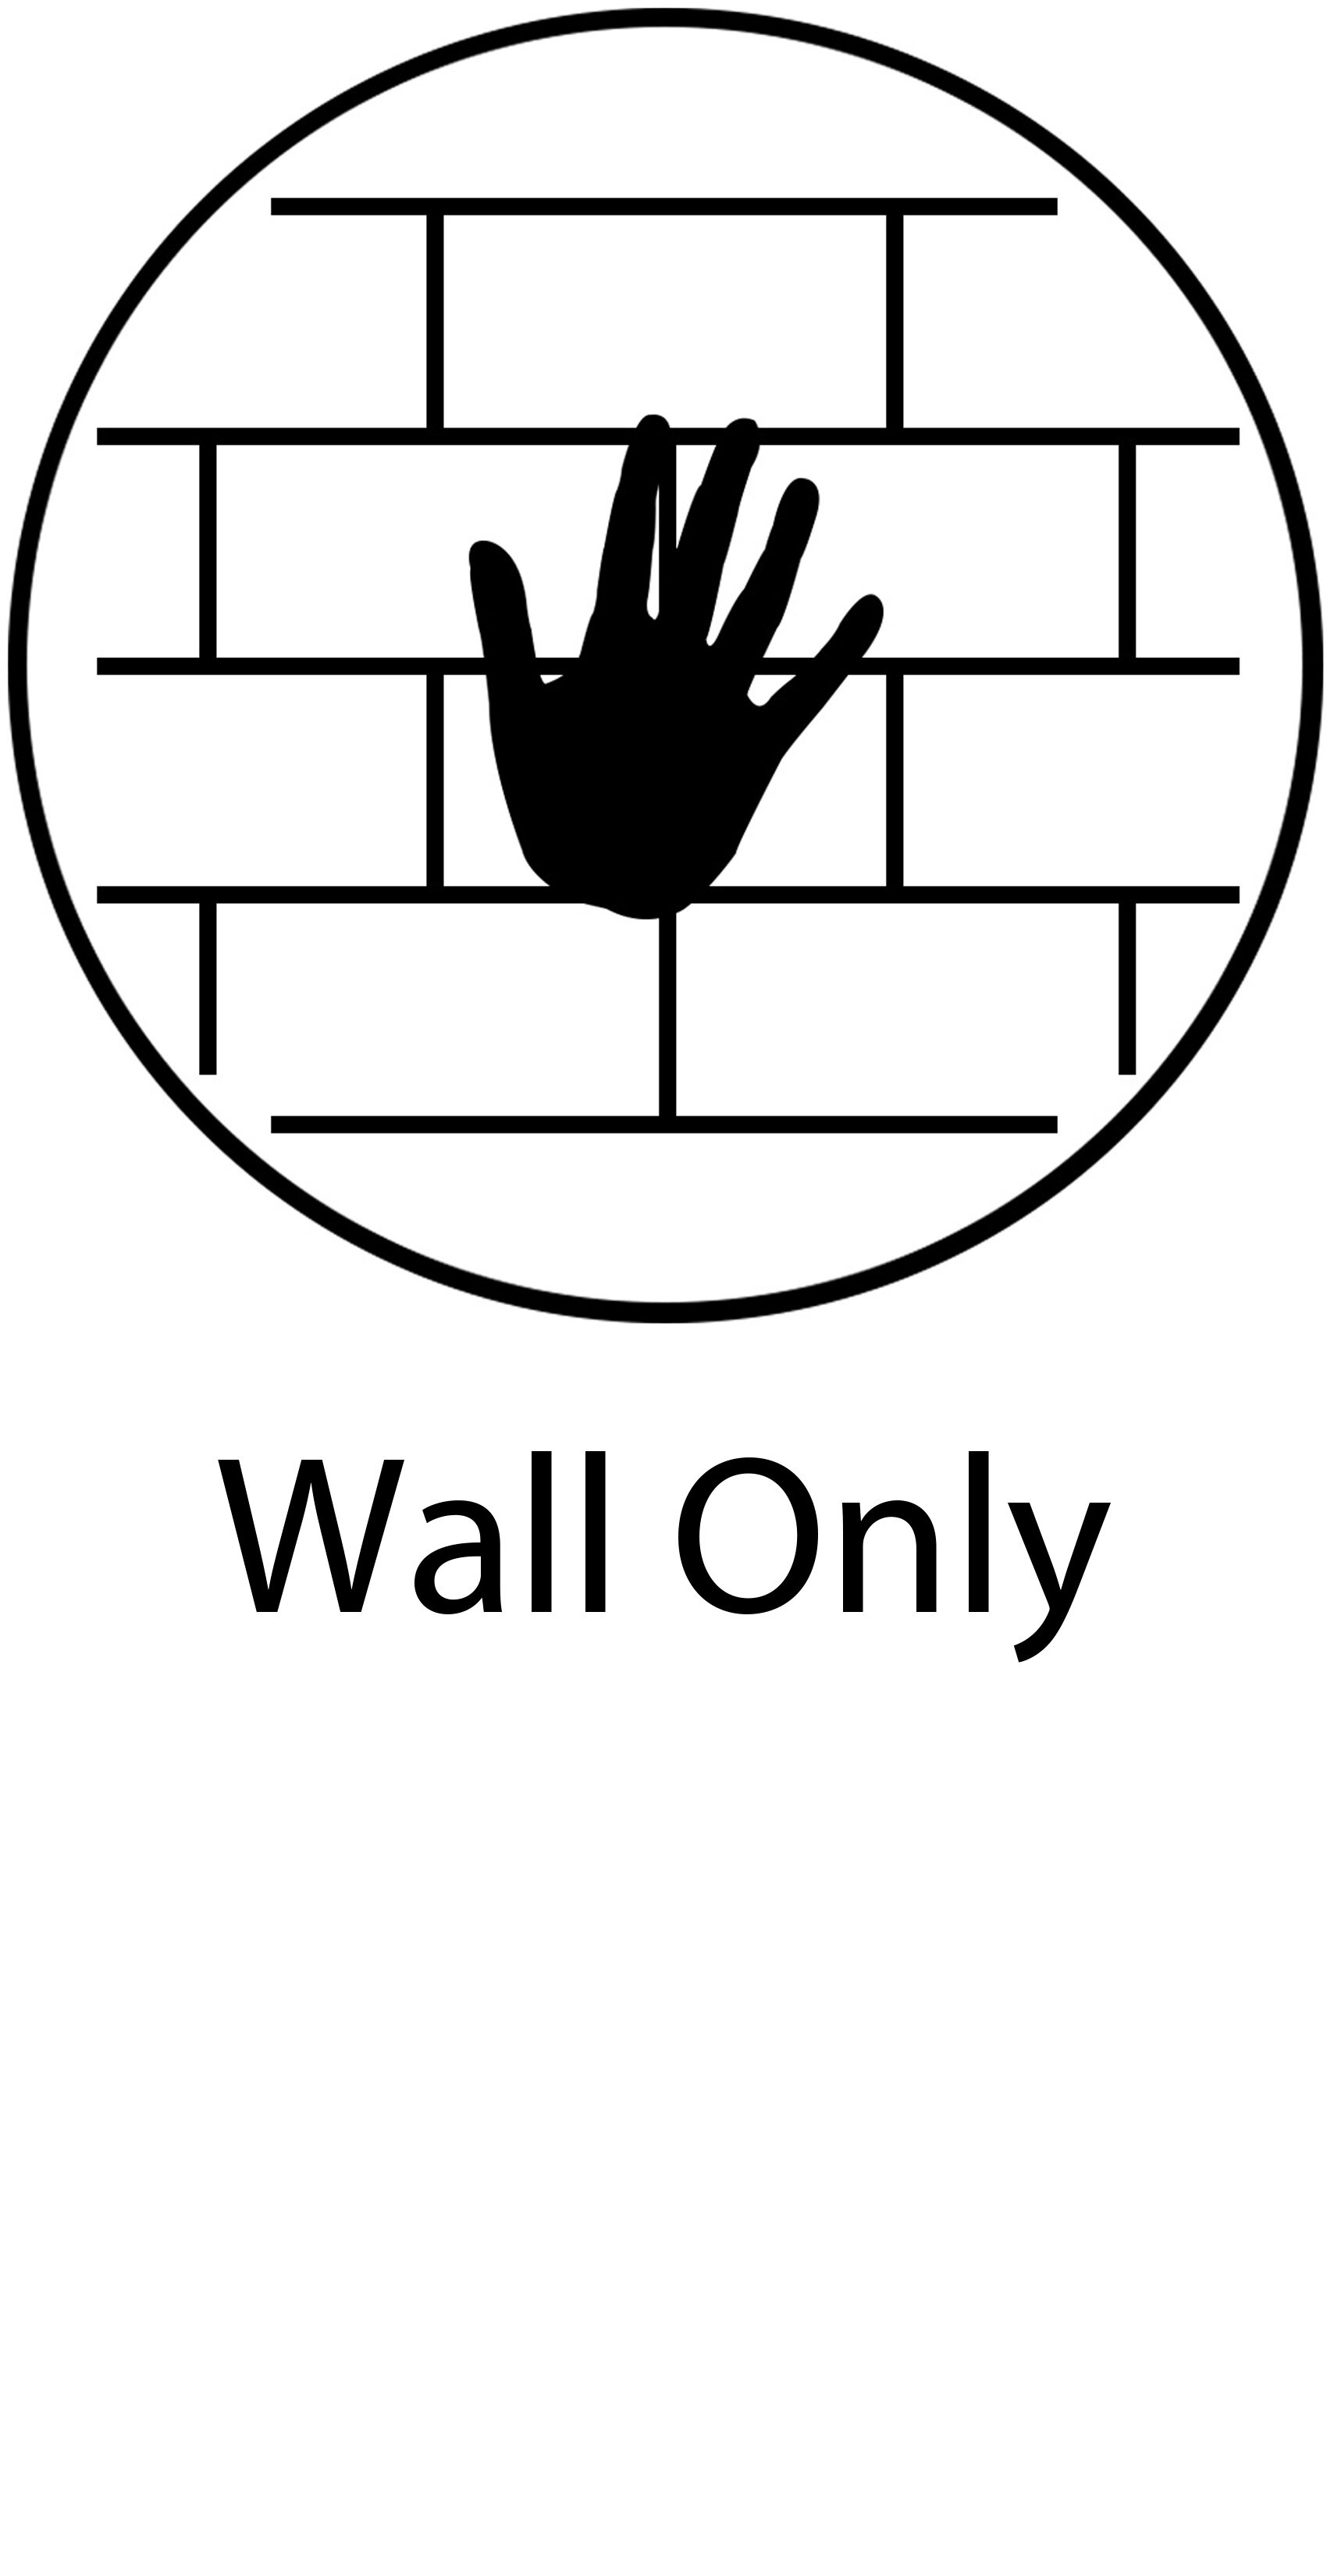 03 Wall only.jpg